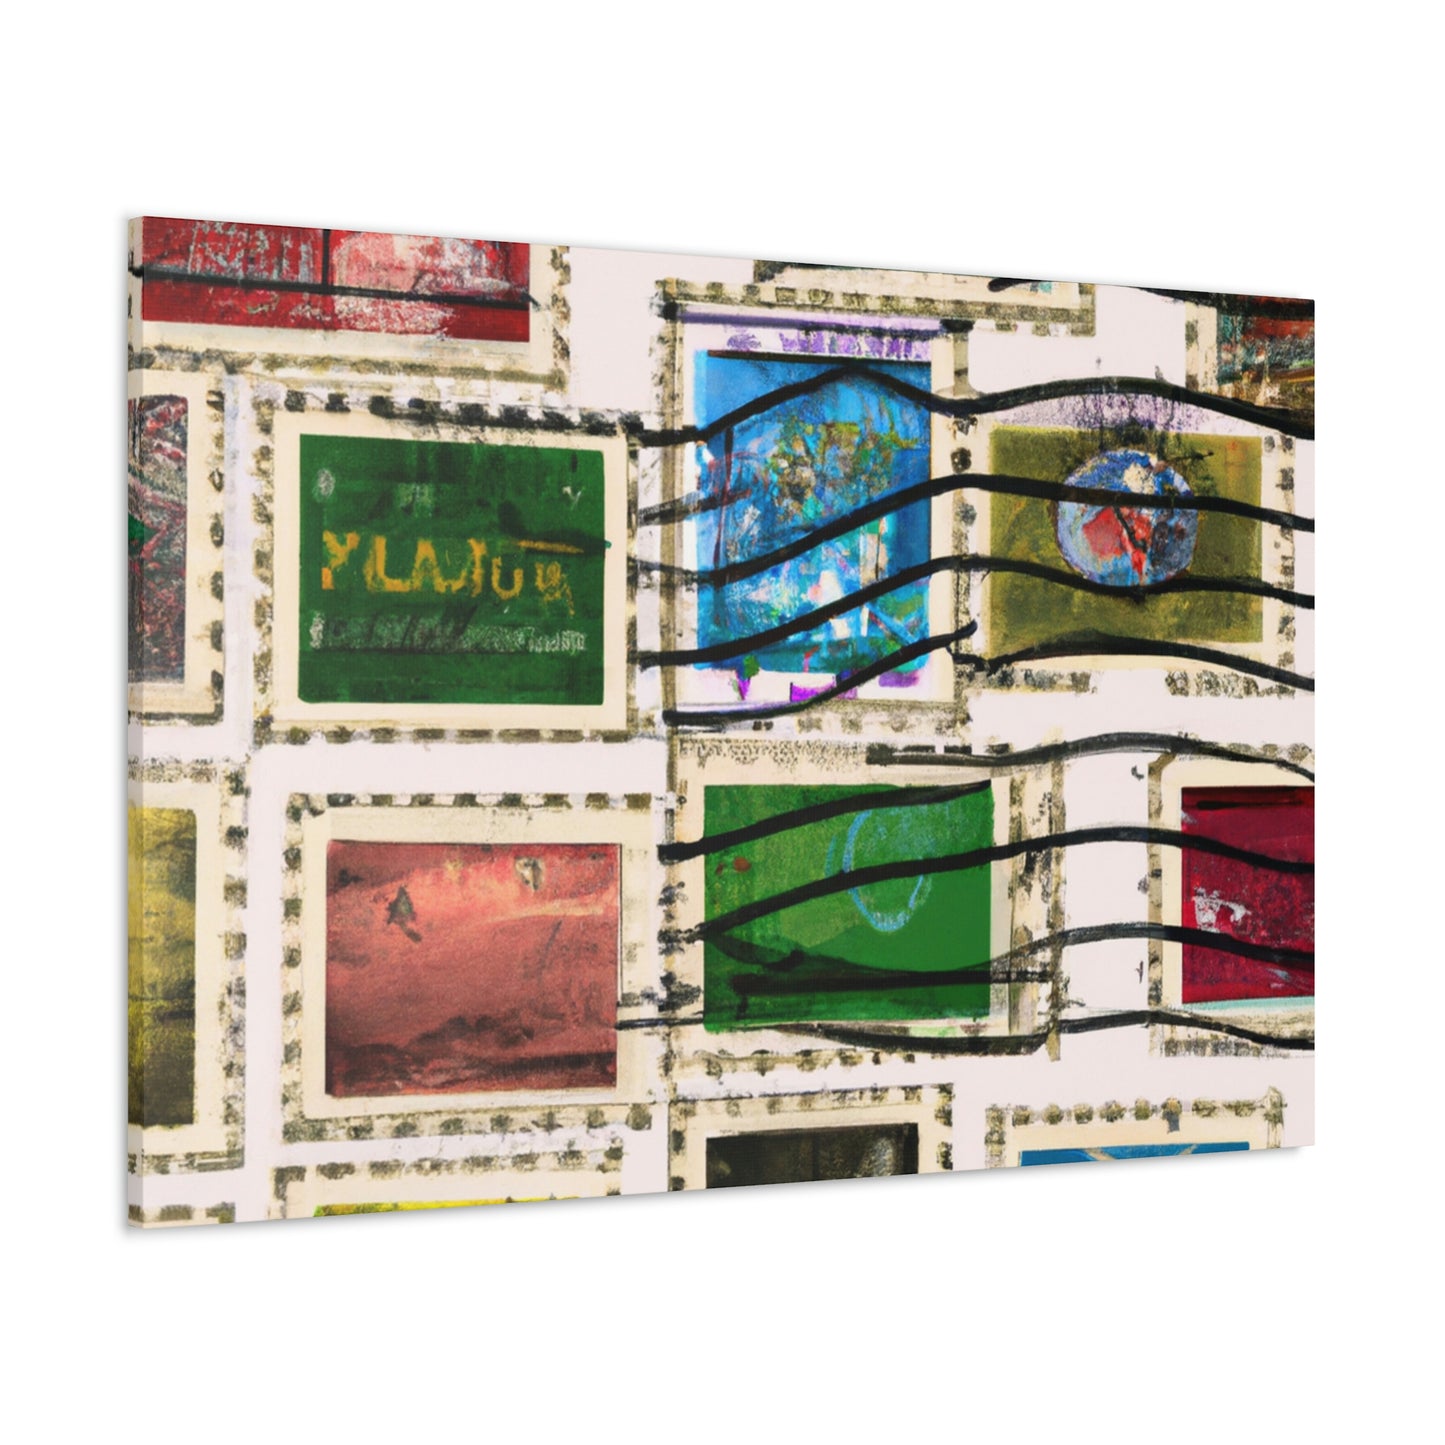 "A Global Journey - Collectible Postage Stamps" - Canvas